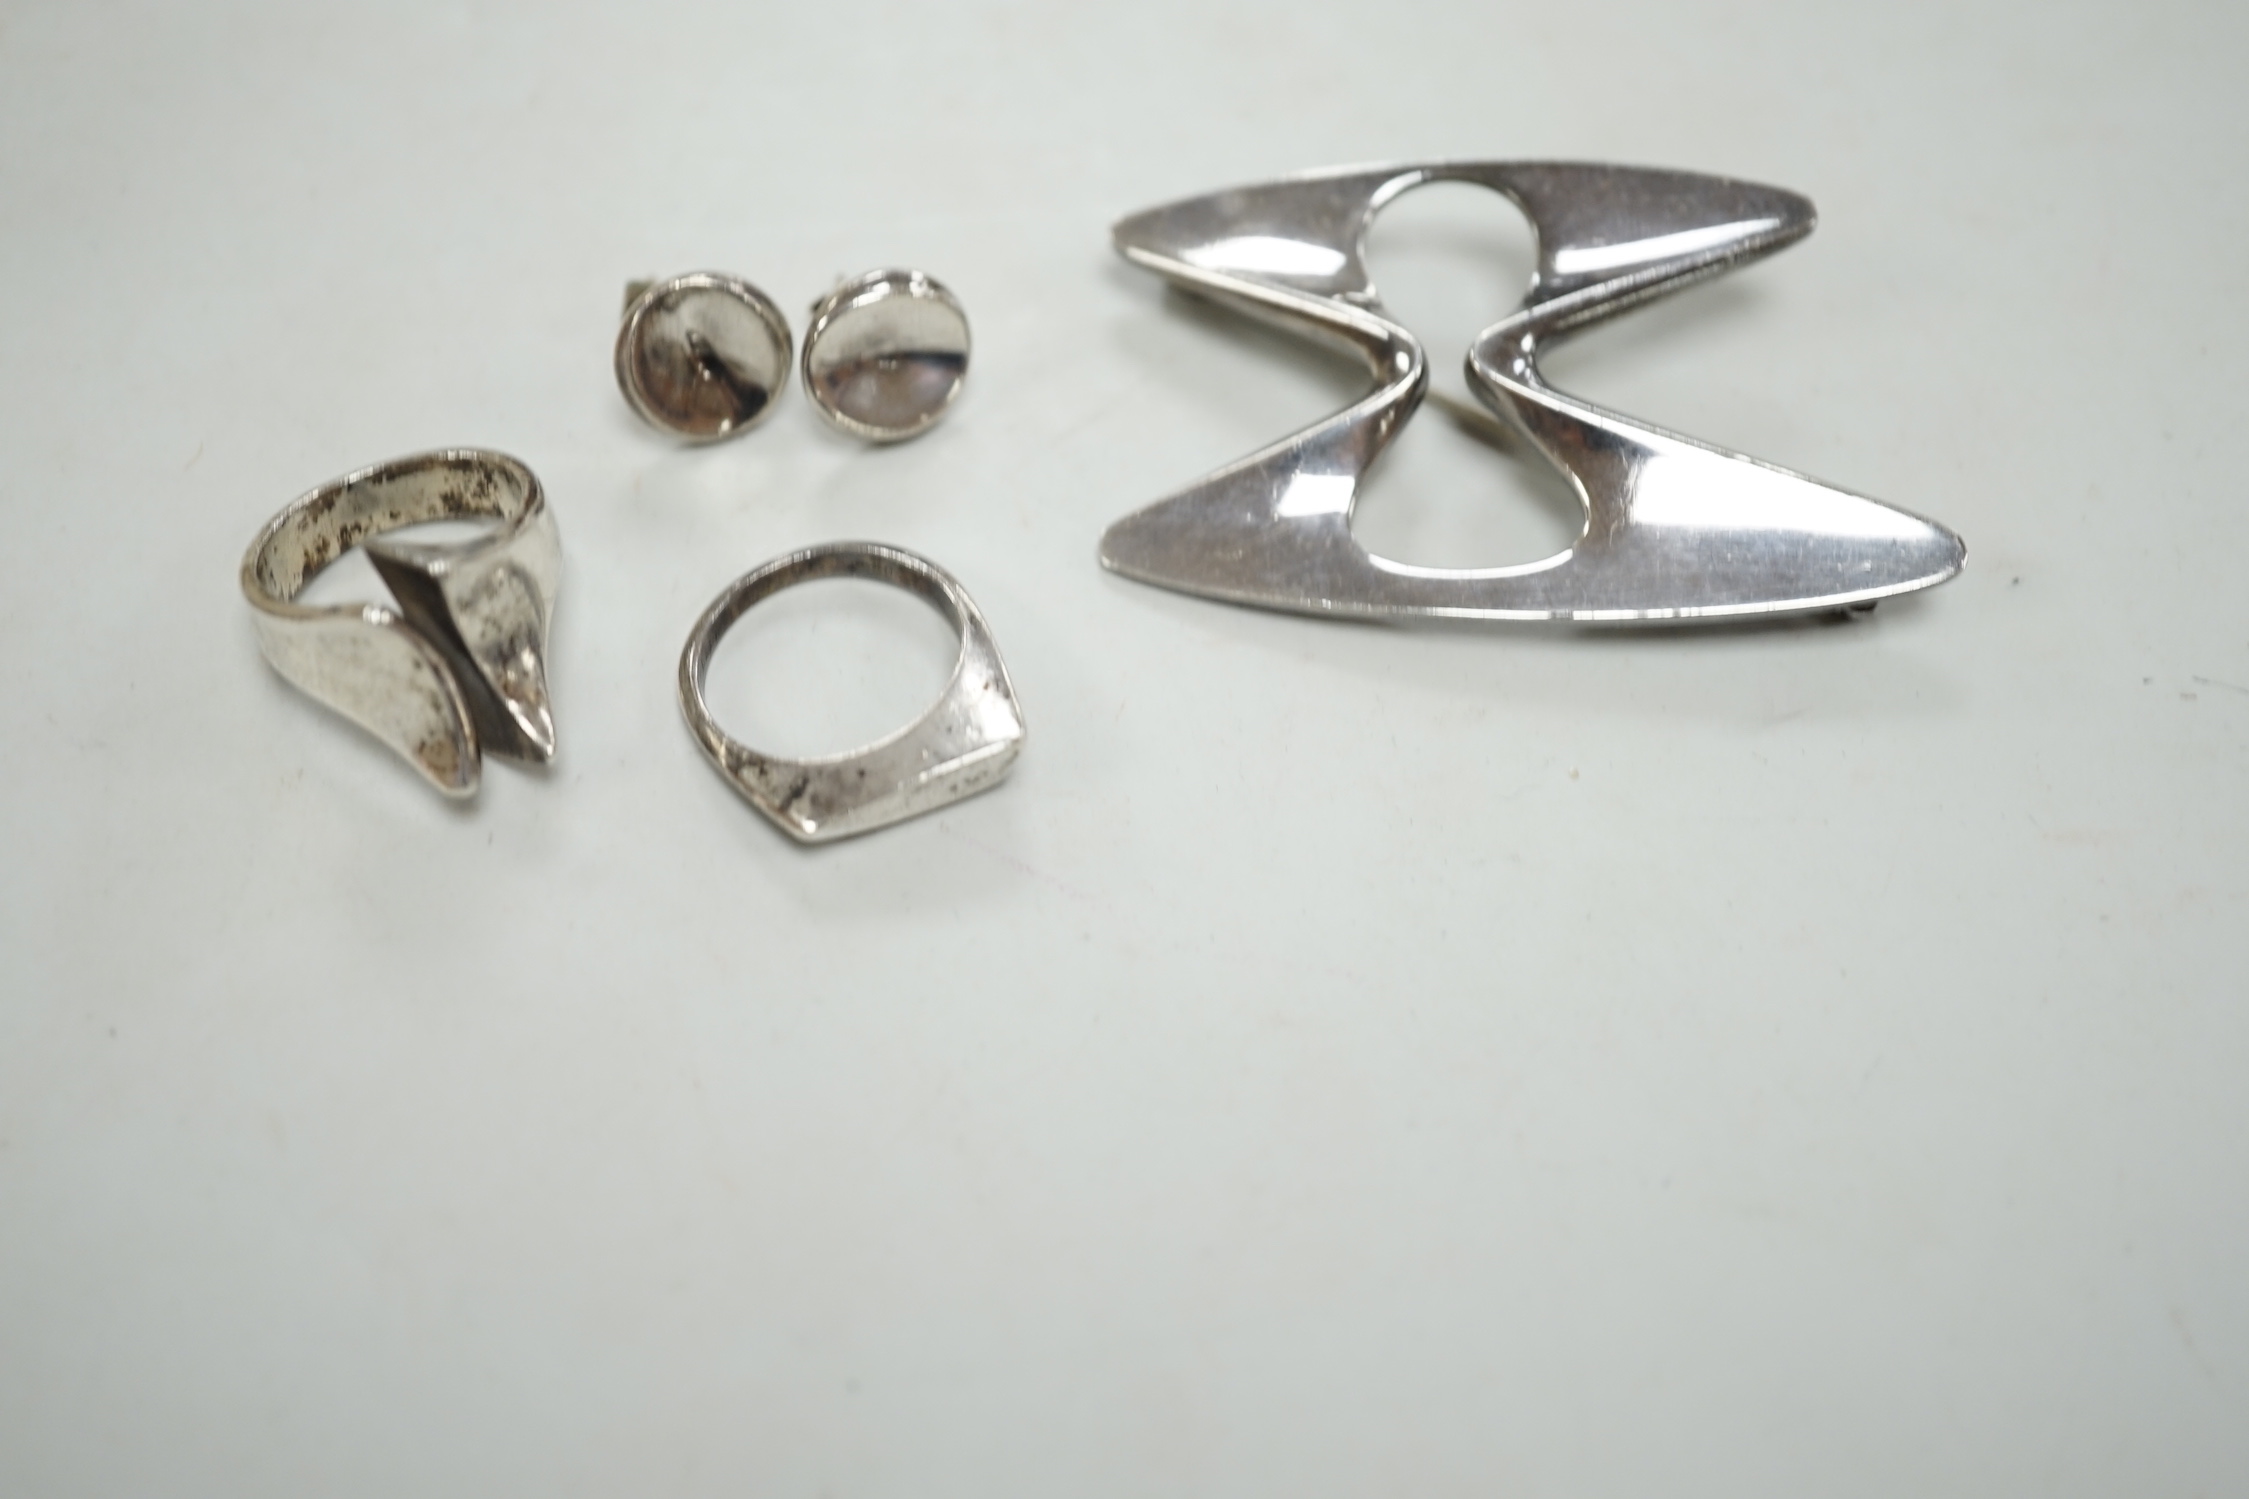 A Georg Jensen sterling free form brooch, design no. 369, a pair of Georg Jensen ear studs and two white metal rings.